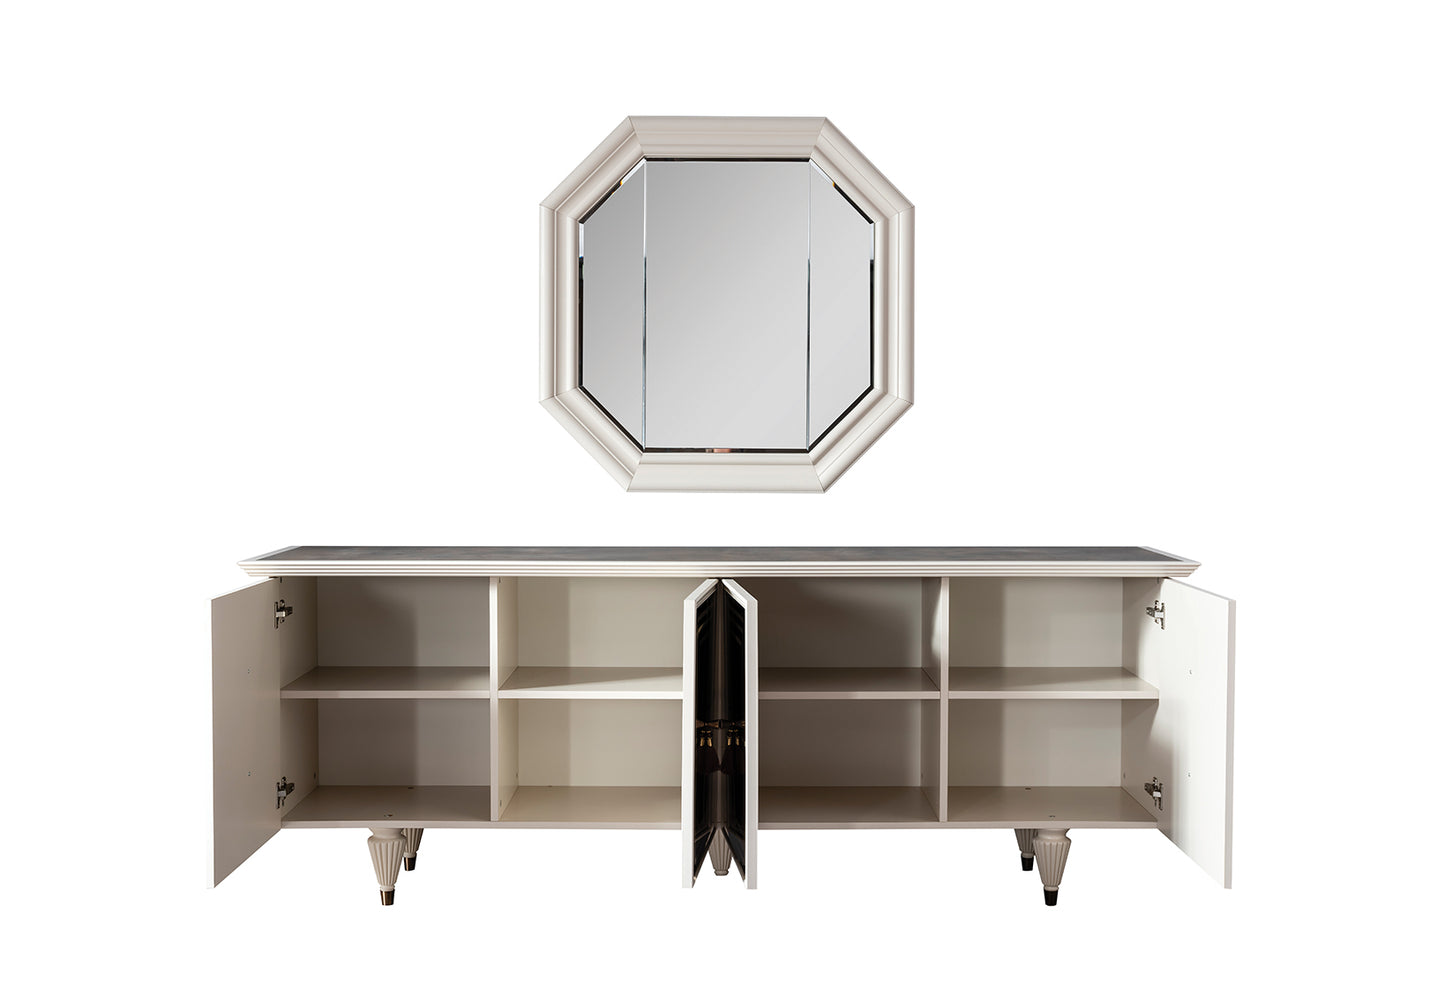 NİRVANA - ( 6 Chairs + Table + Buffet Cabinet + Mirror)